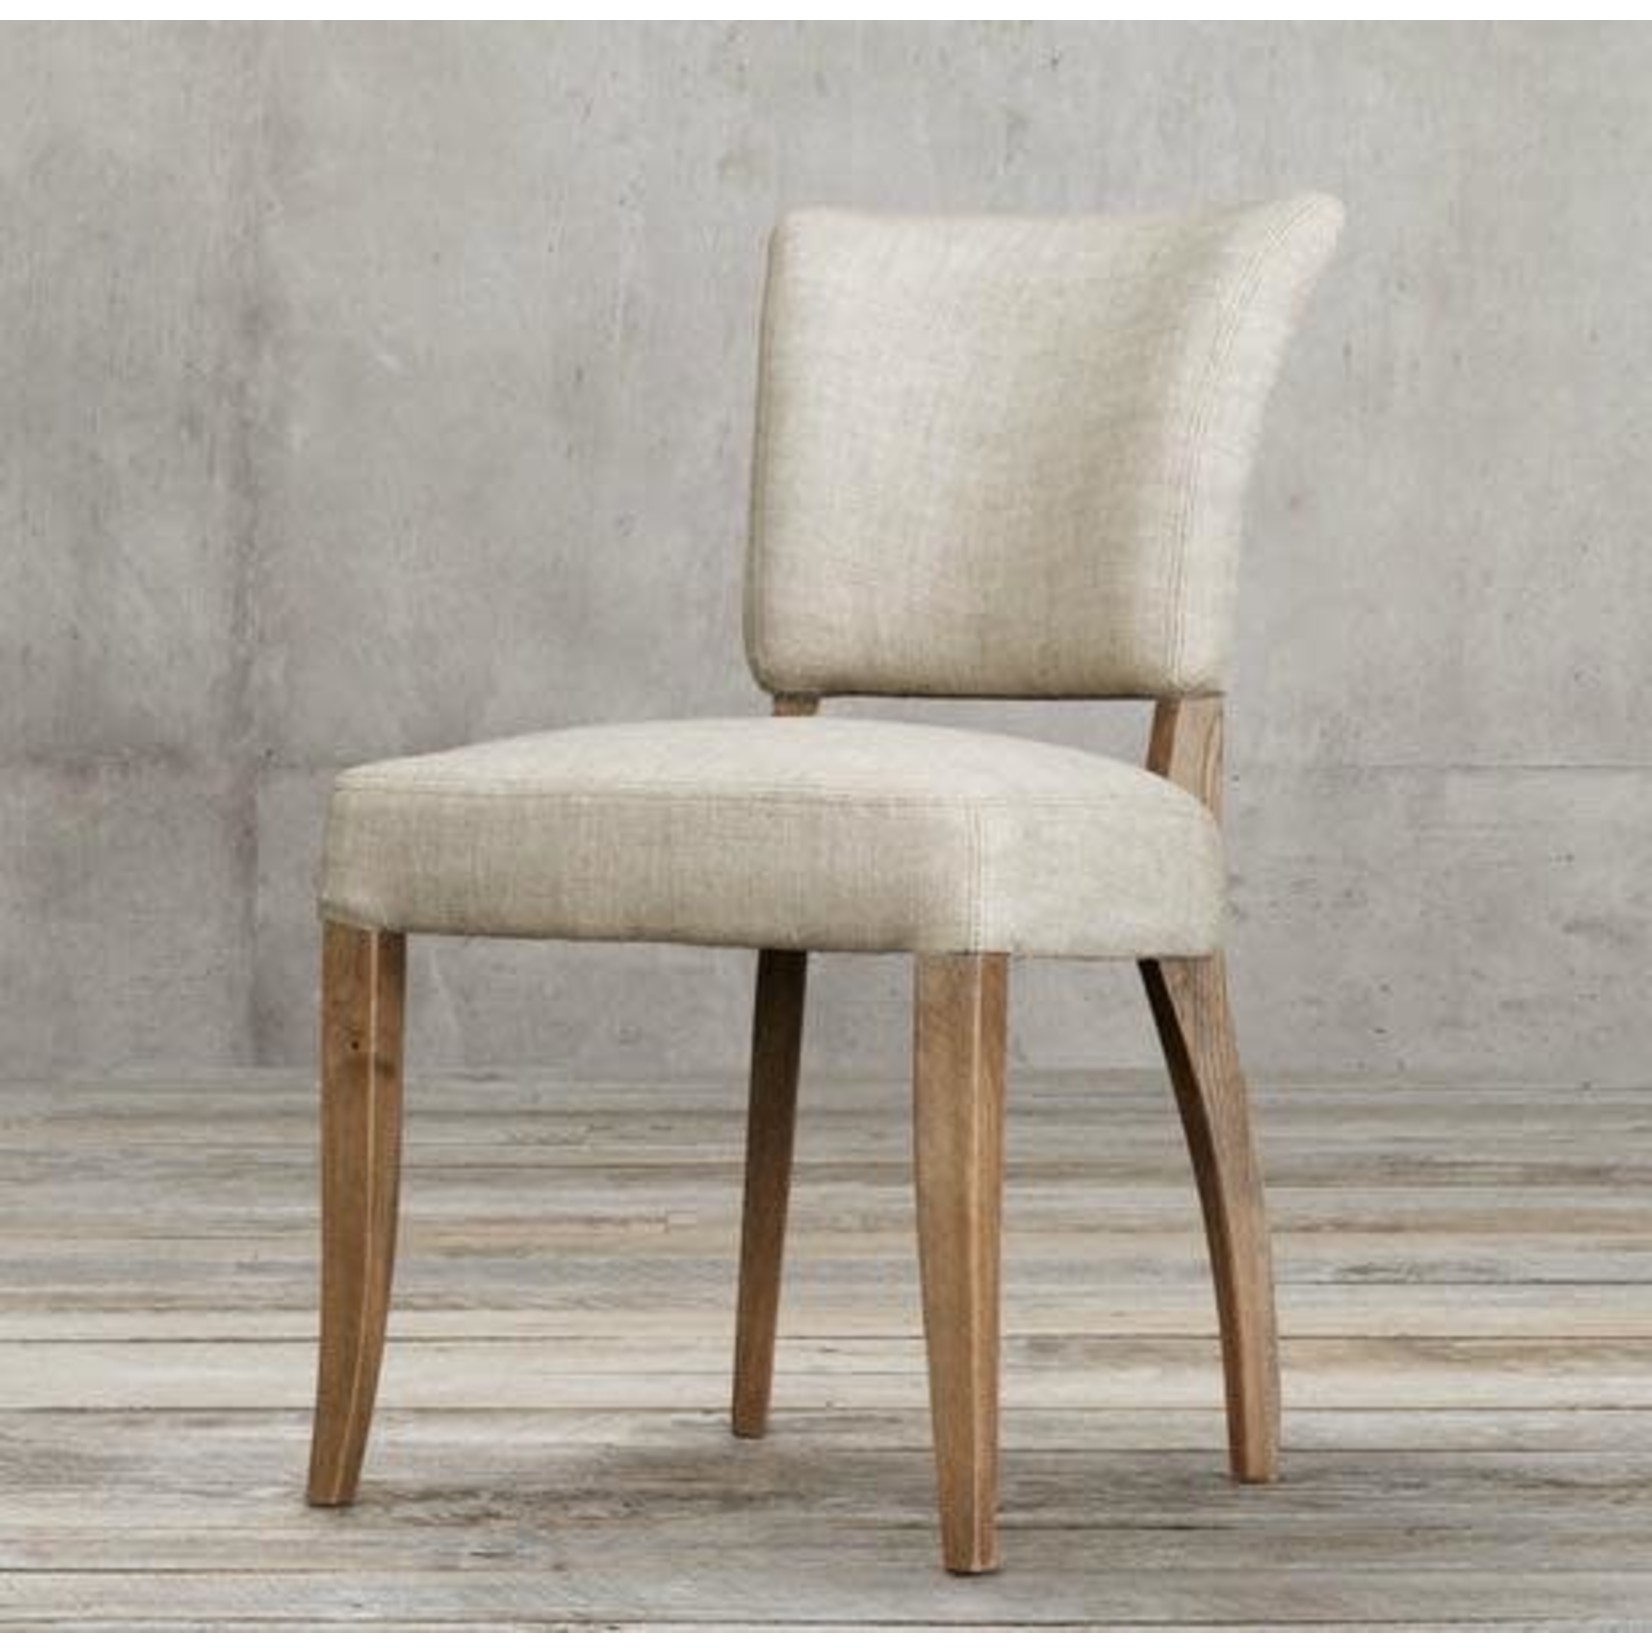 TIMOTHY OULTON MIMI DINING CHAIR GALTA LINEN CREMA WETHER OAK